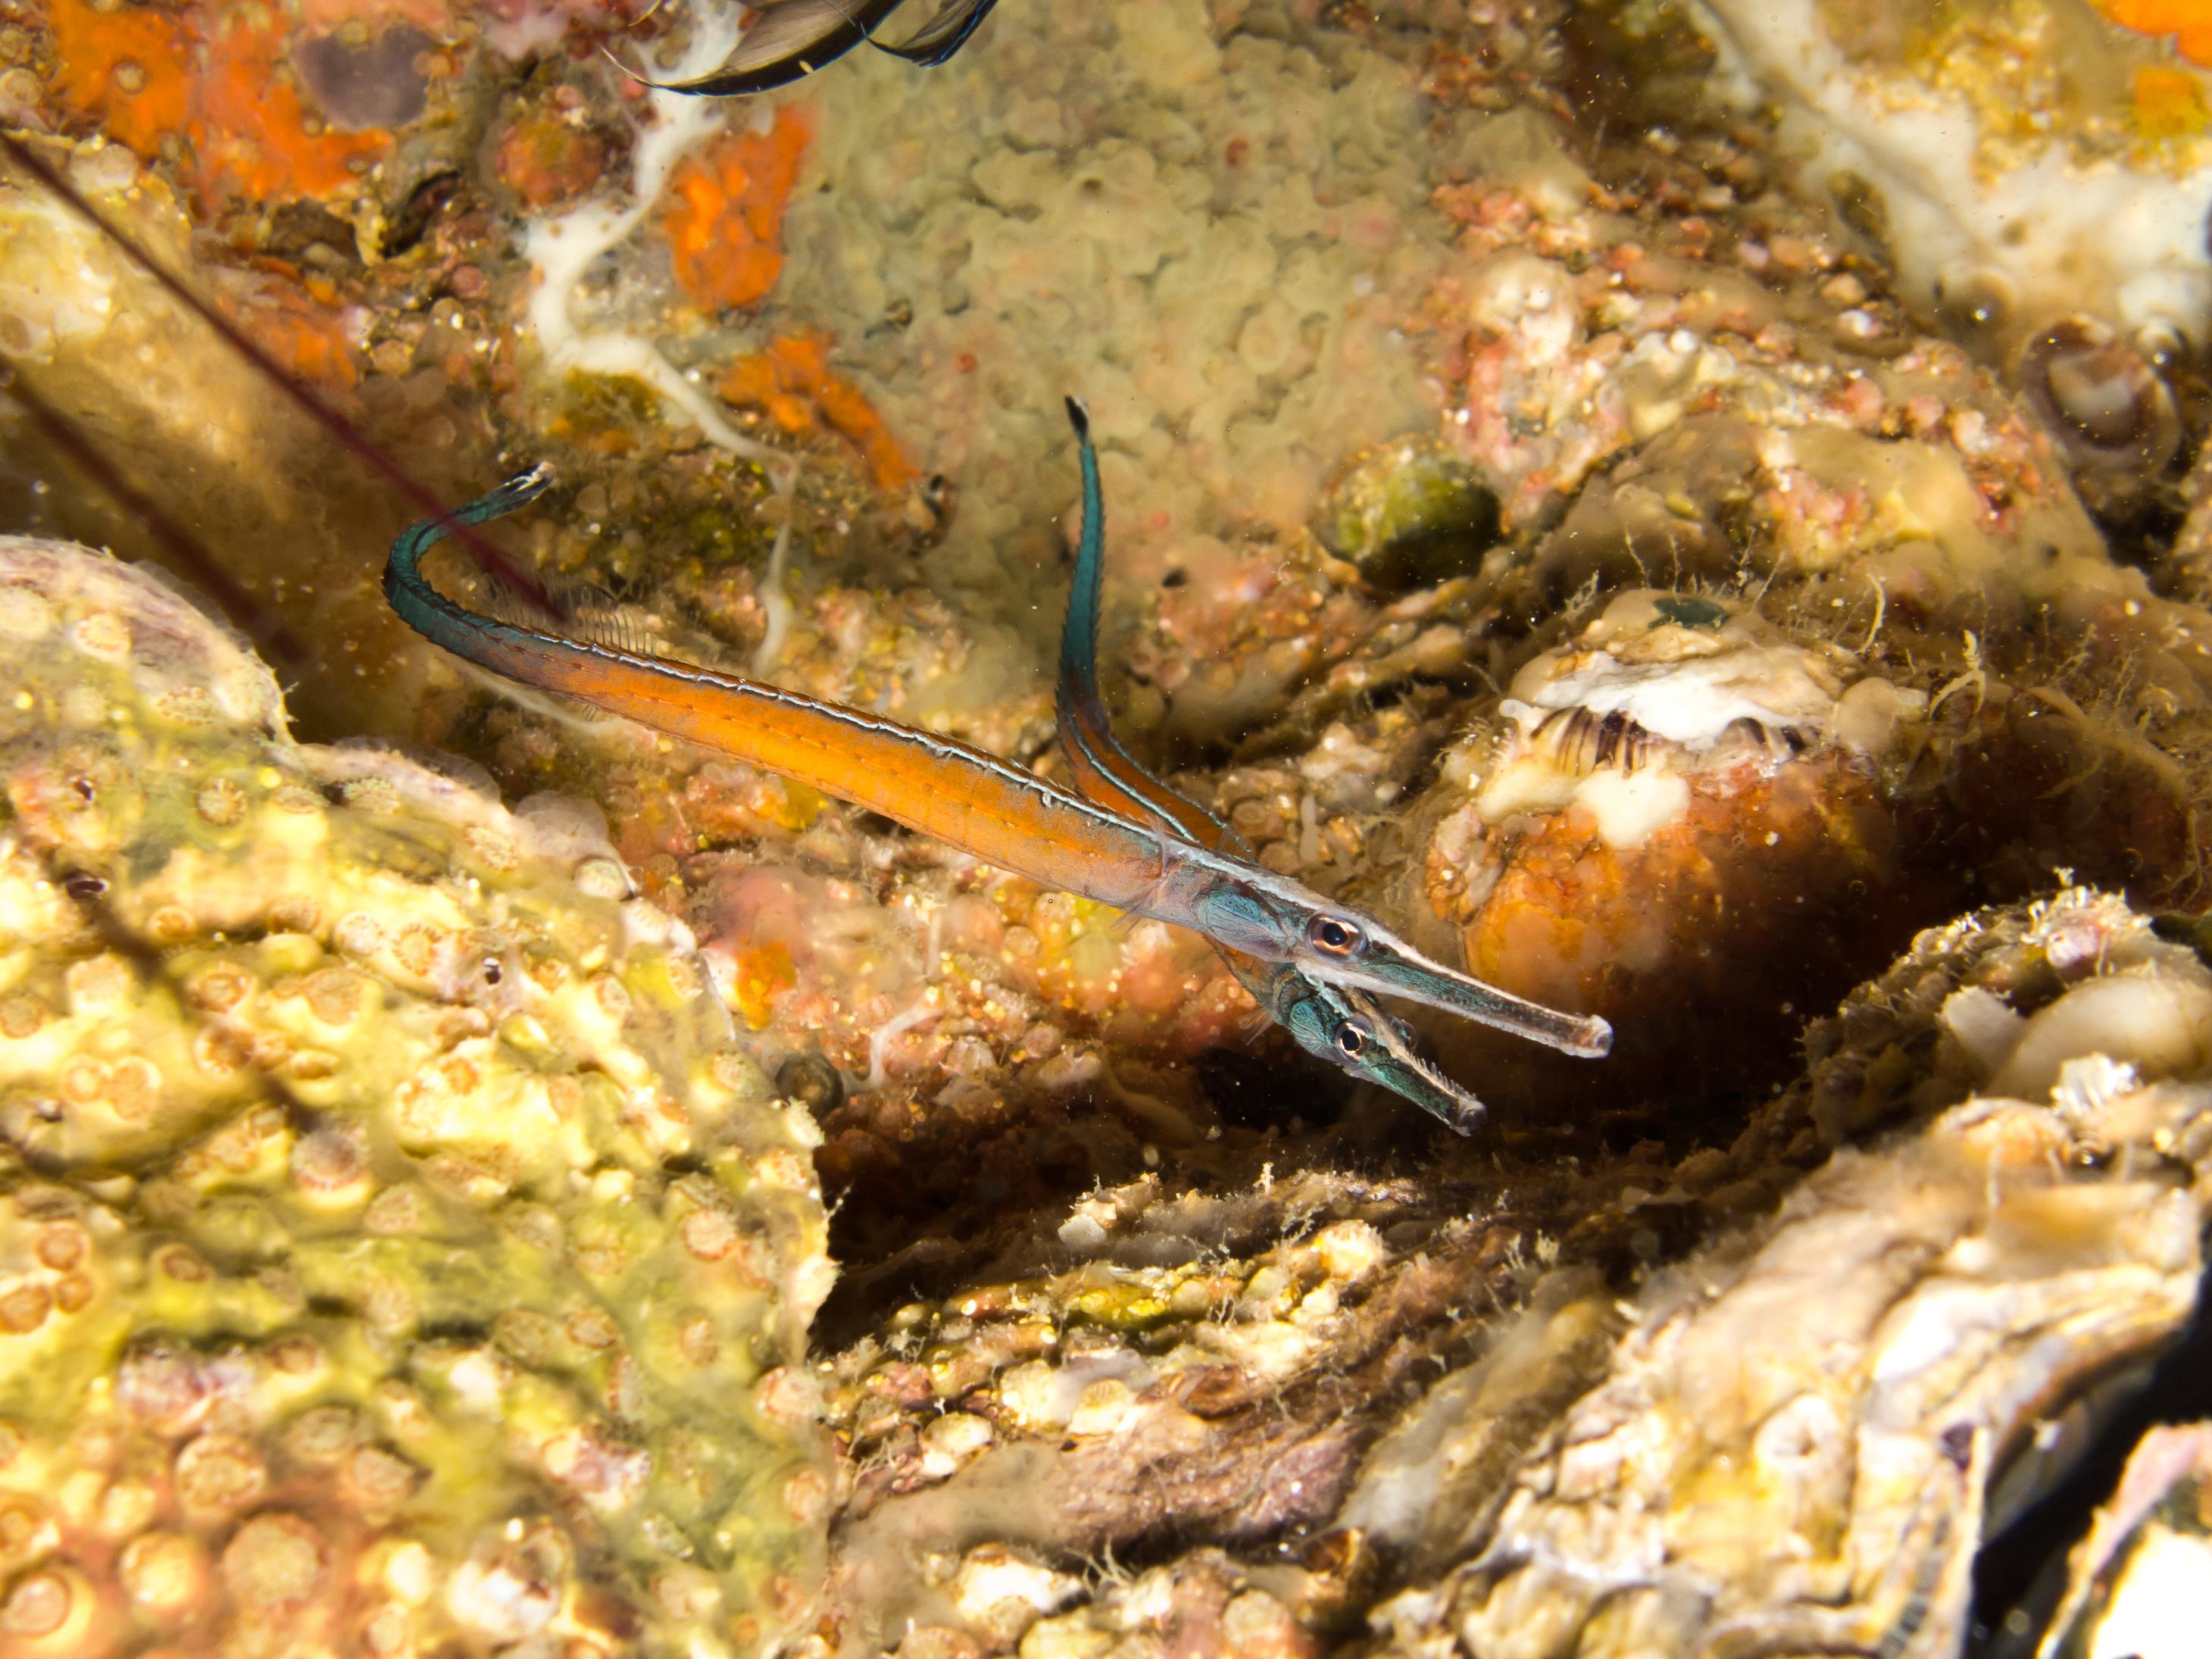 A photo of Pipefish